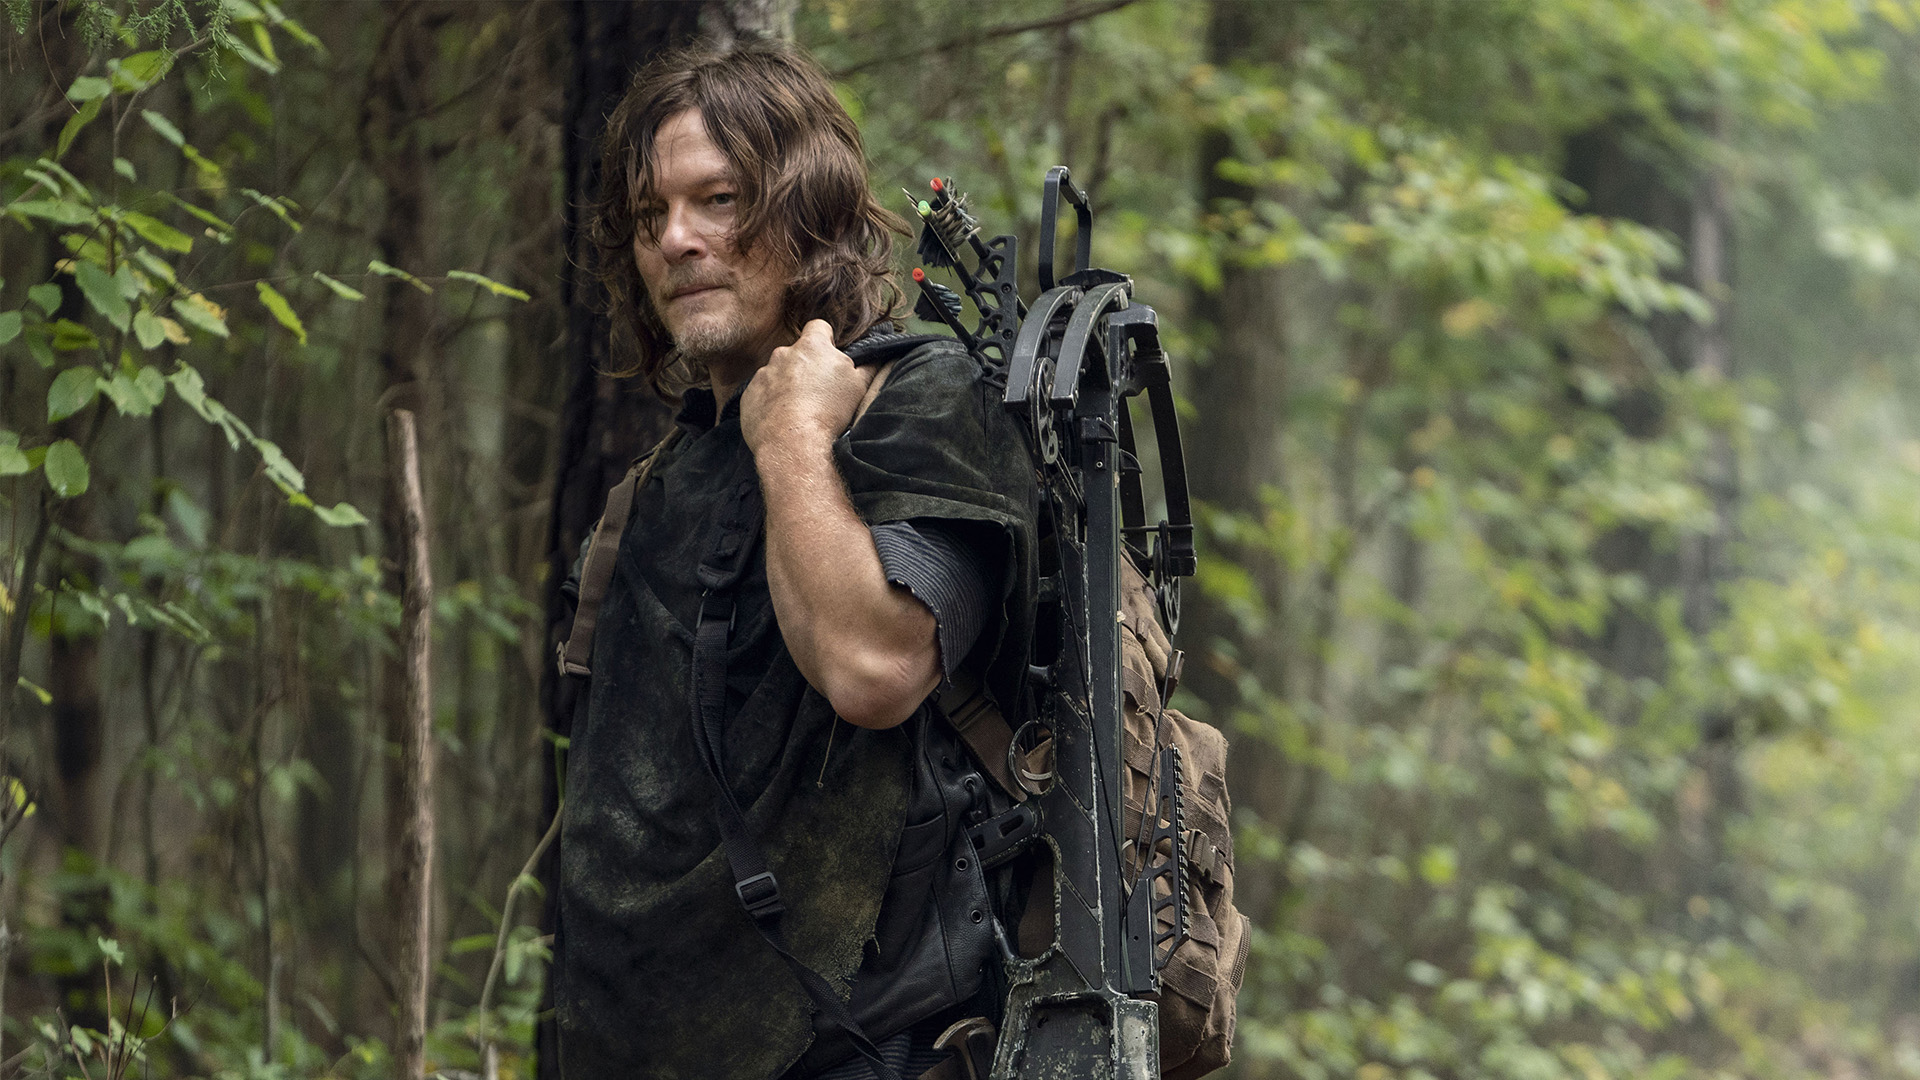 Daryl's Story, The story of Daryl Dixon, as told by Norman Reedus., TV-MA, Season 1010555, Episode 1